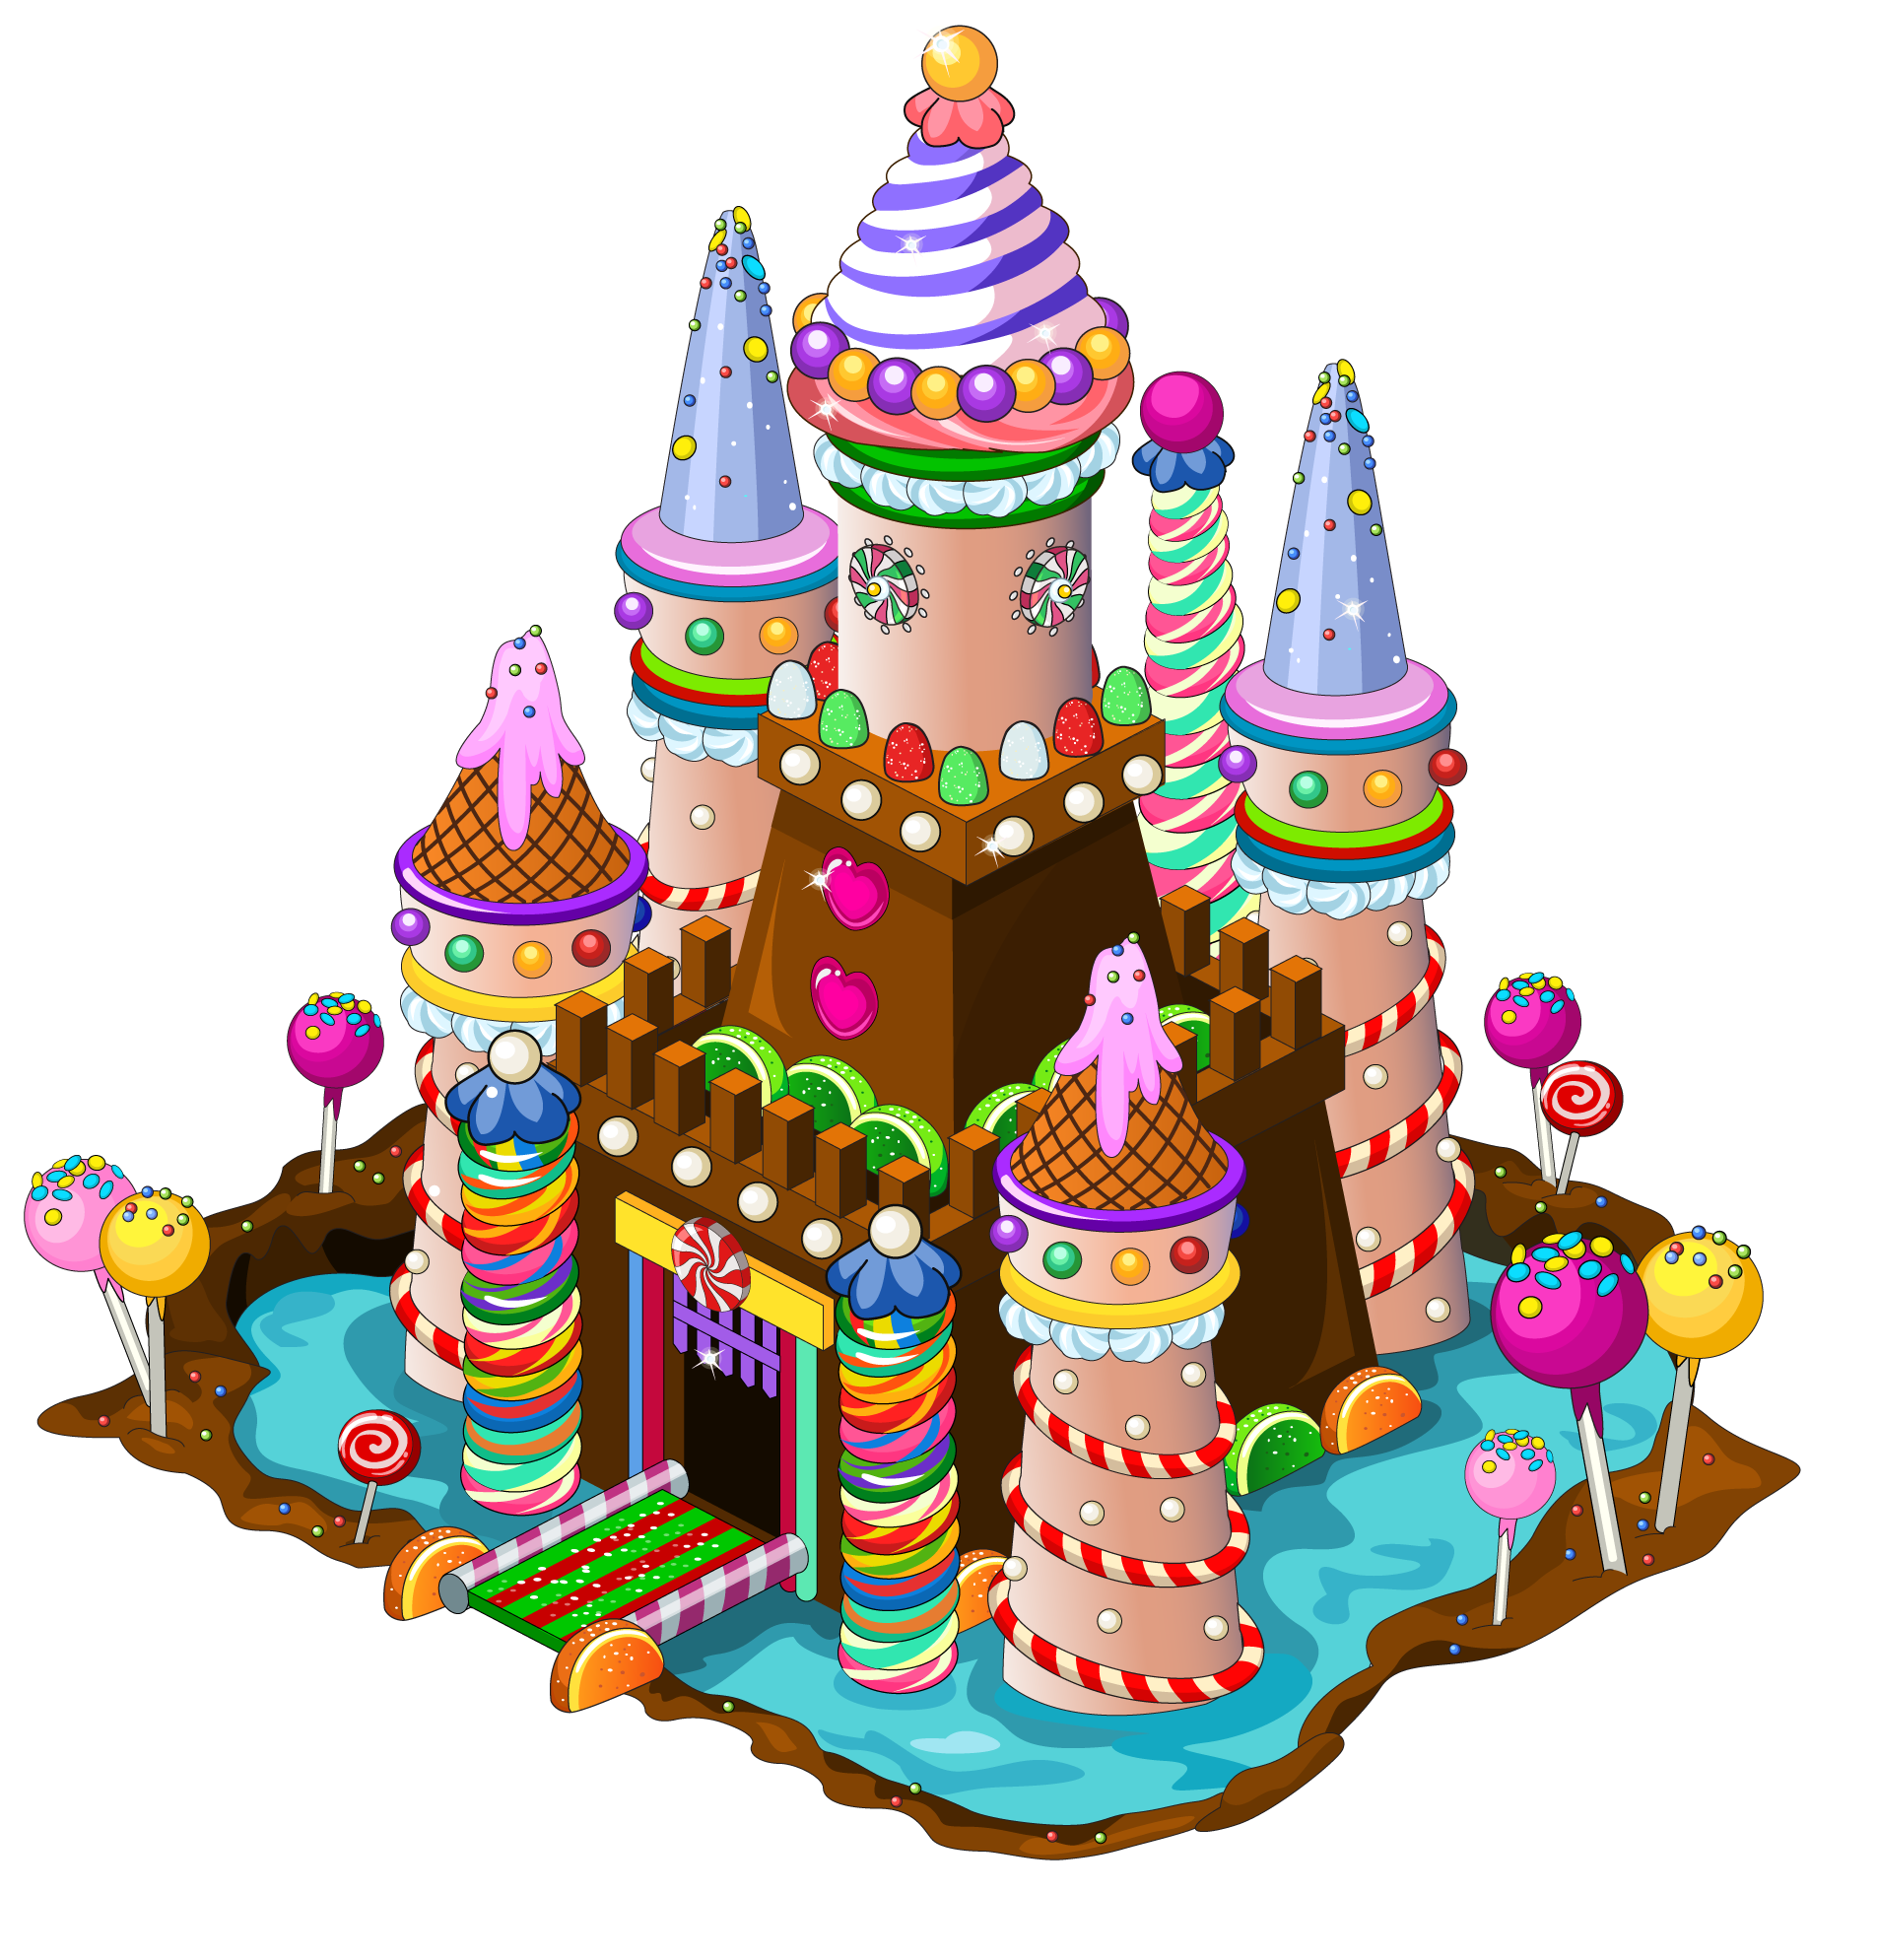 candyland-palace-family-guy-the-quest-for-stuff-wiki-fandom